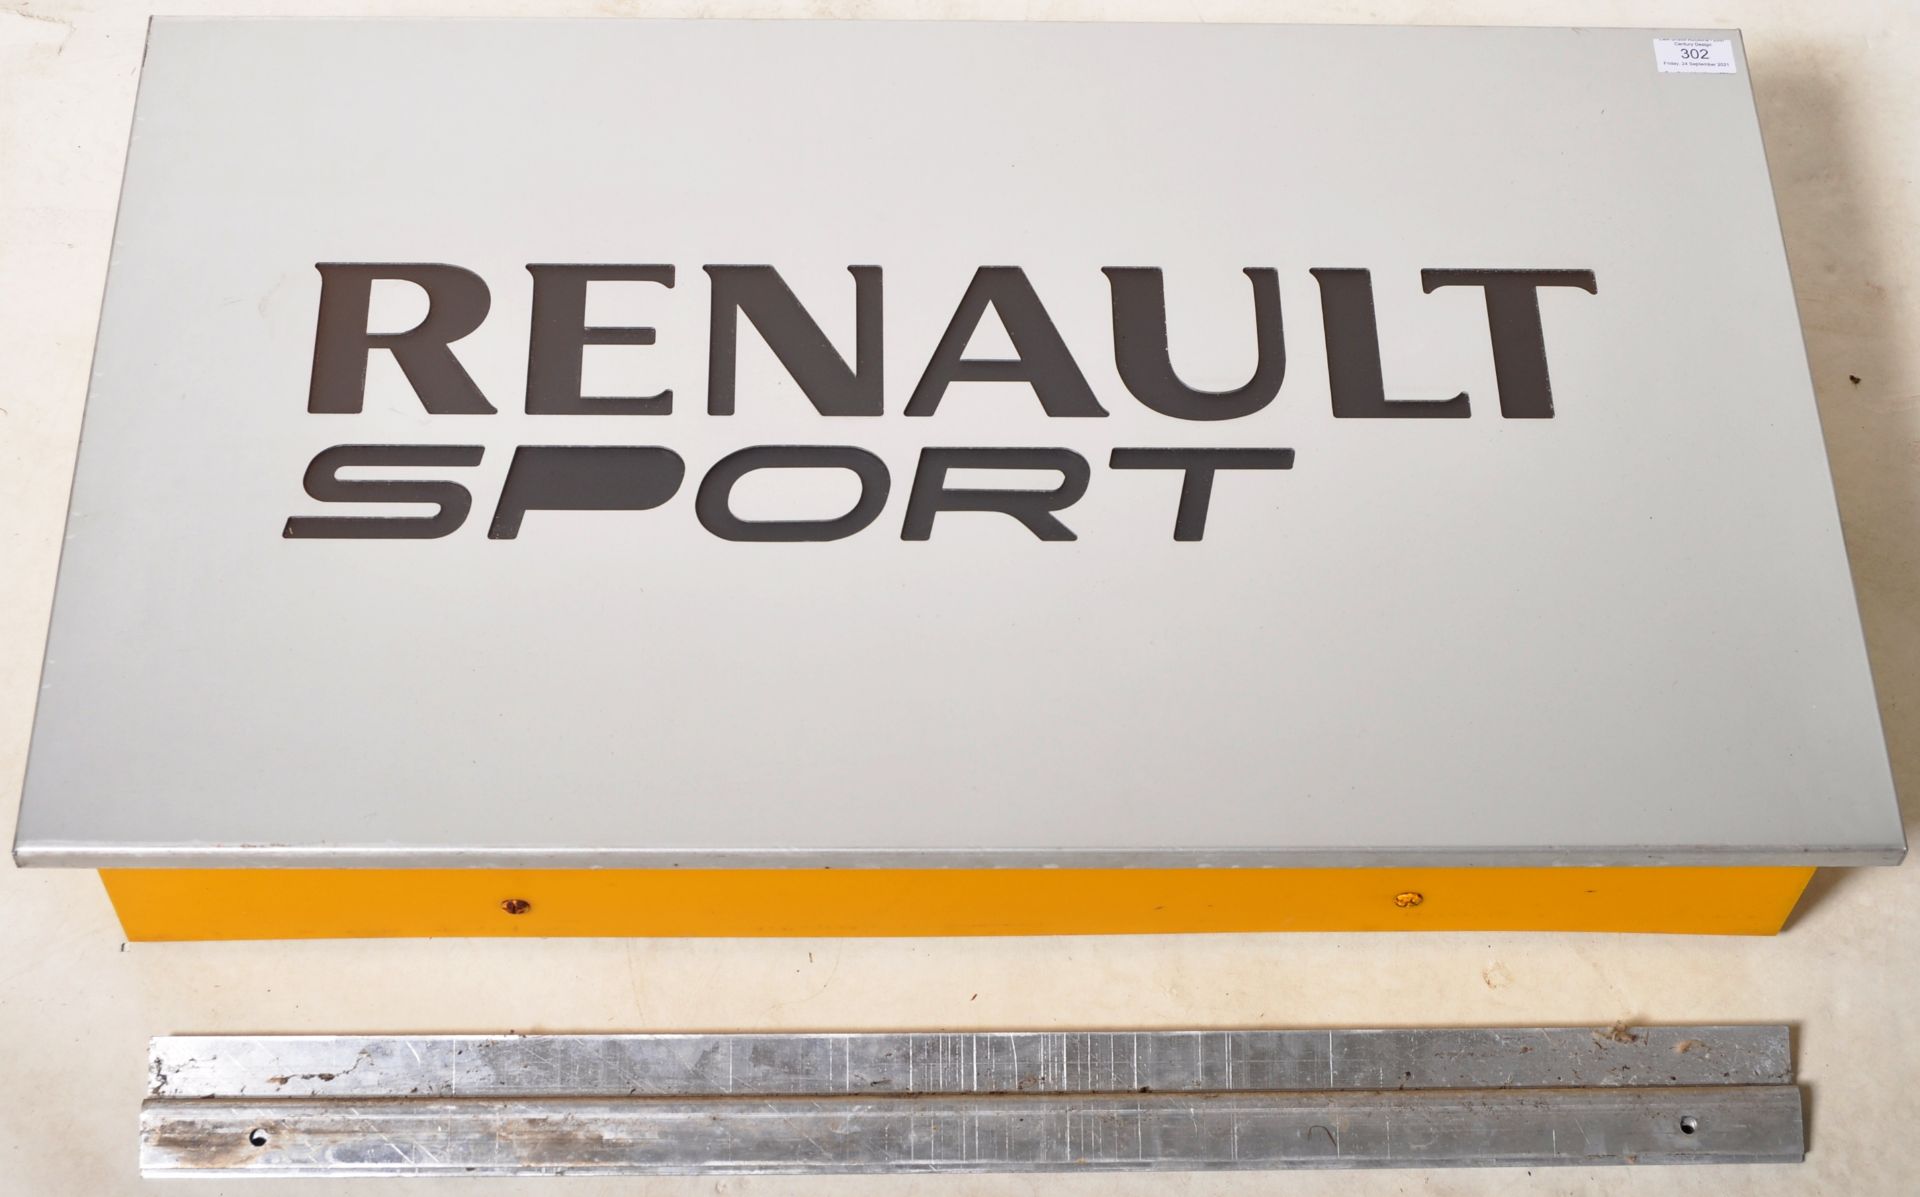 RENAULT SPORT - POINT OF SALE FORECOURT ADVERTISING SIGN - Image 2 of 4